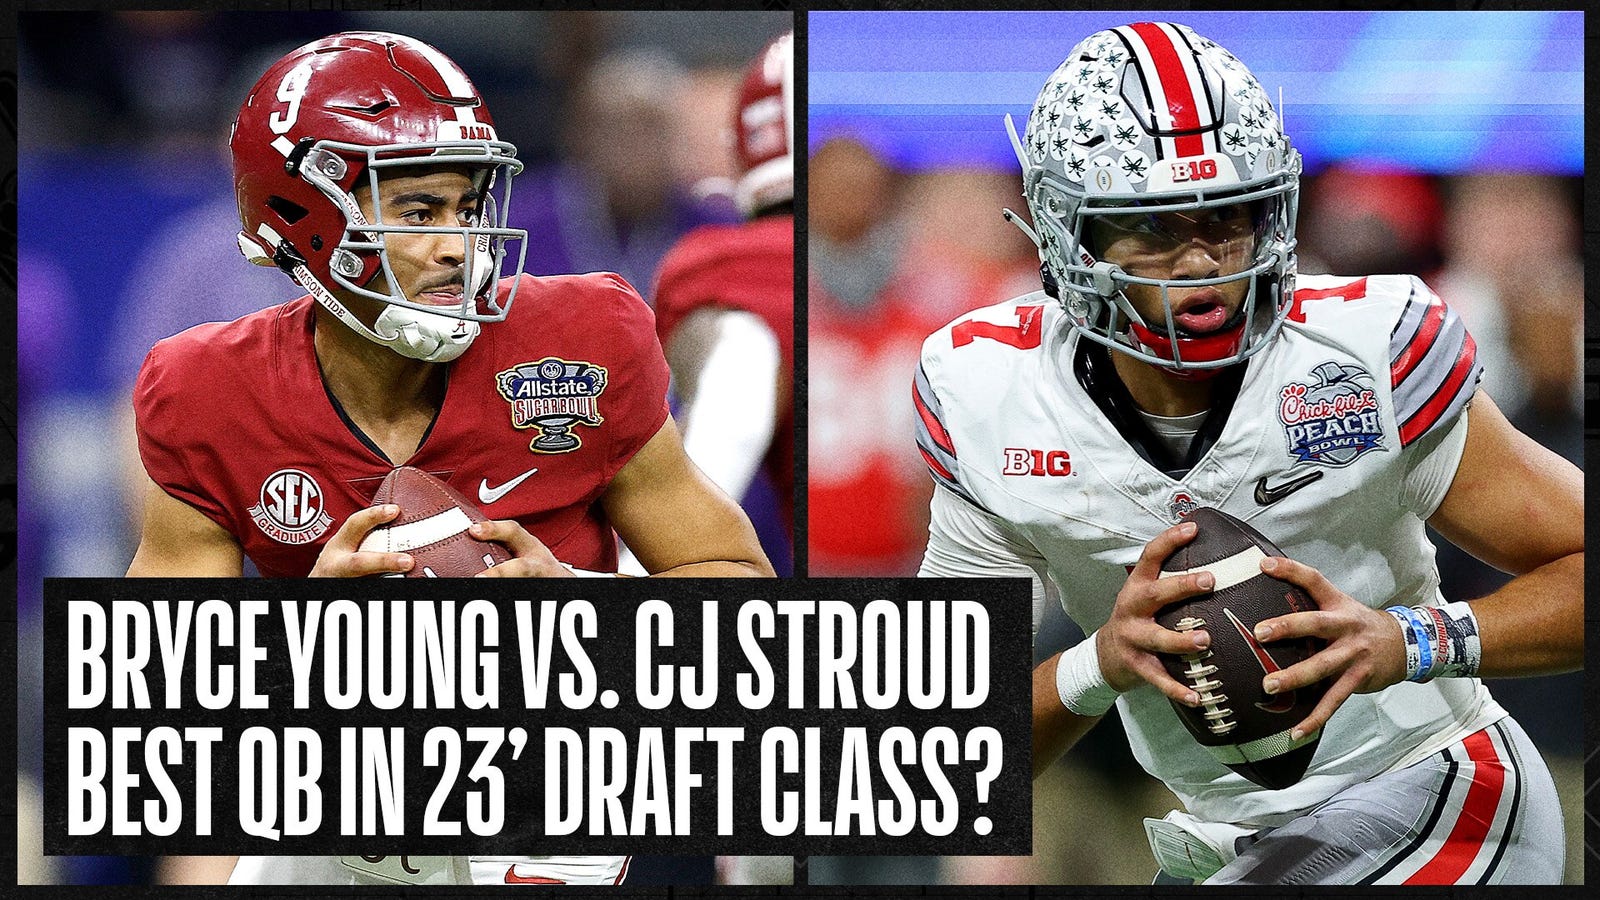 Bryce Young vs. C.J. Stroud: Who is the best?